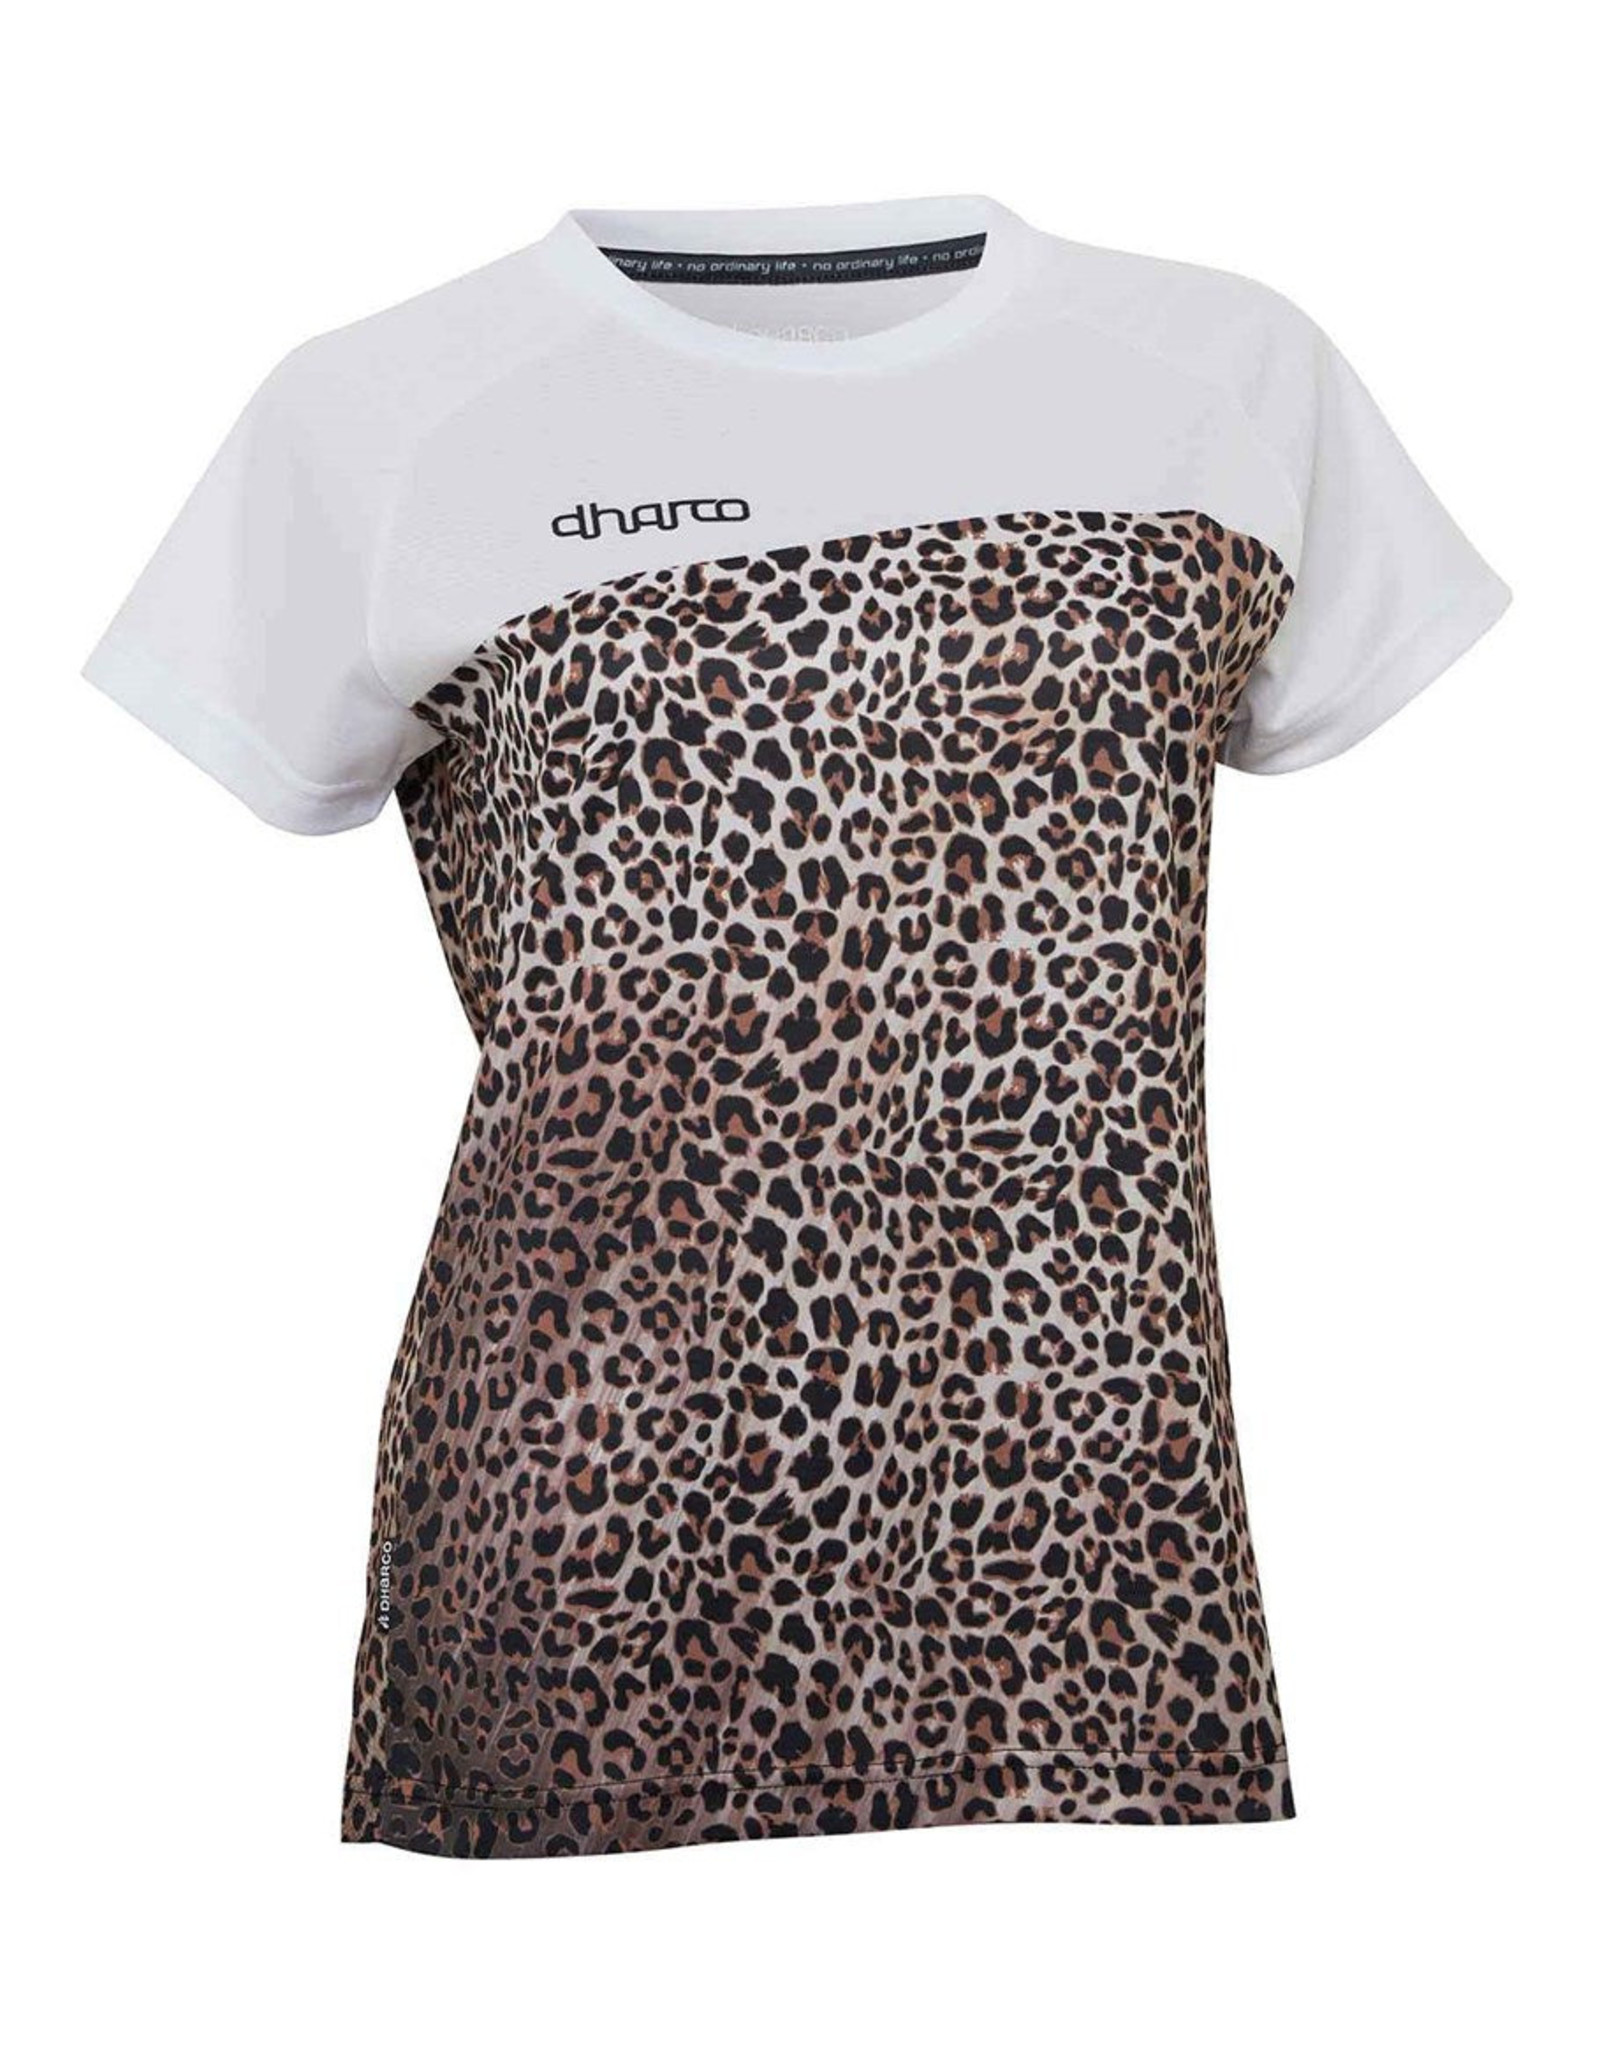 DHaRCO Dharco Women's Leopard SS Jersey